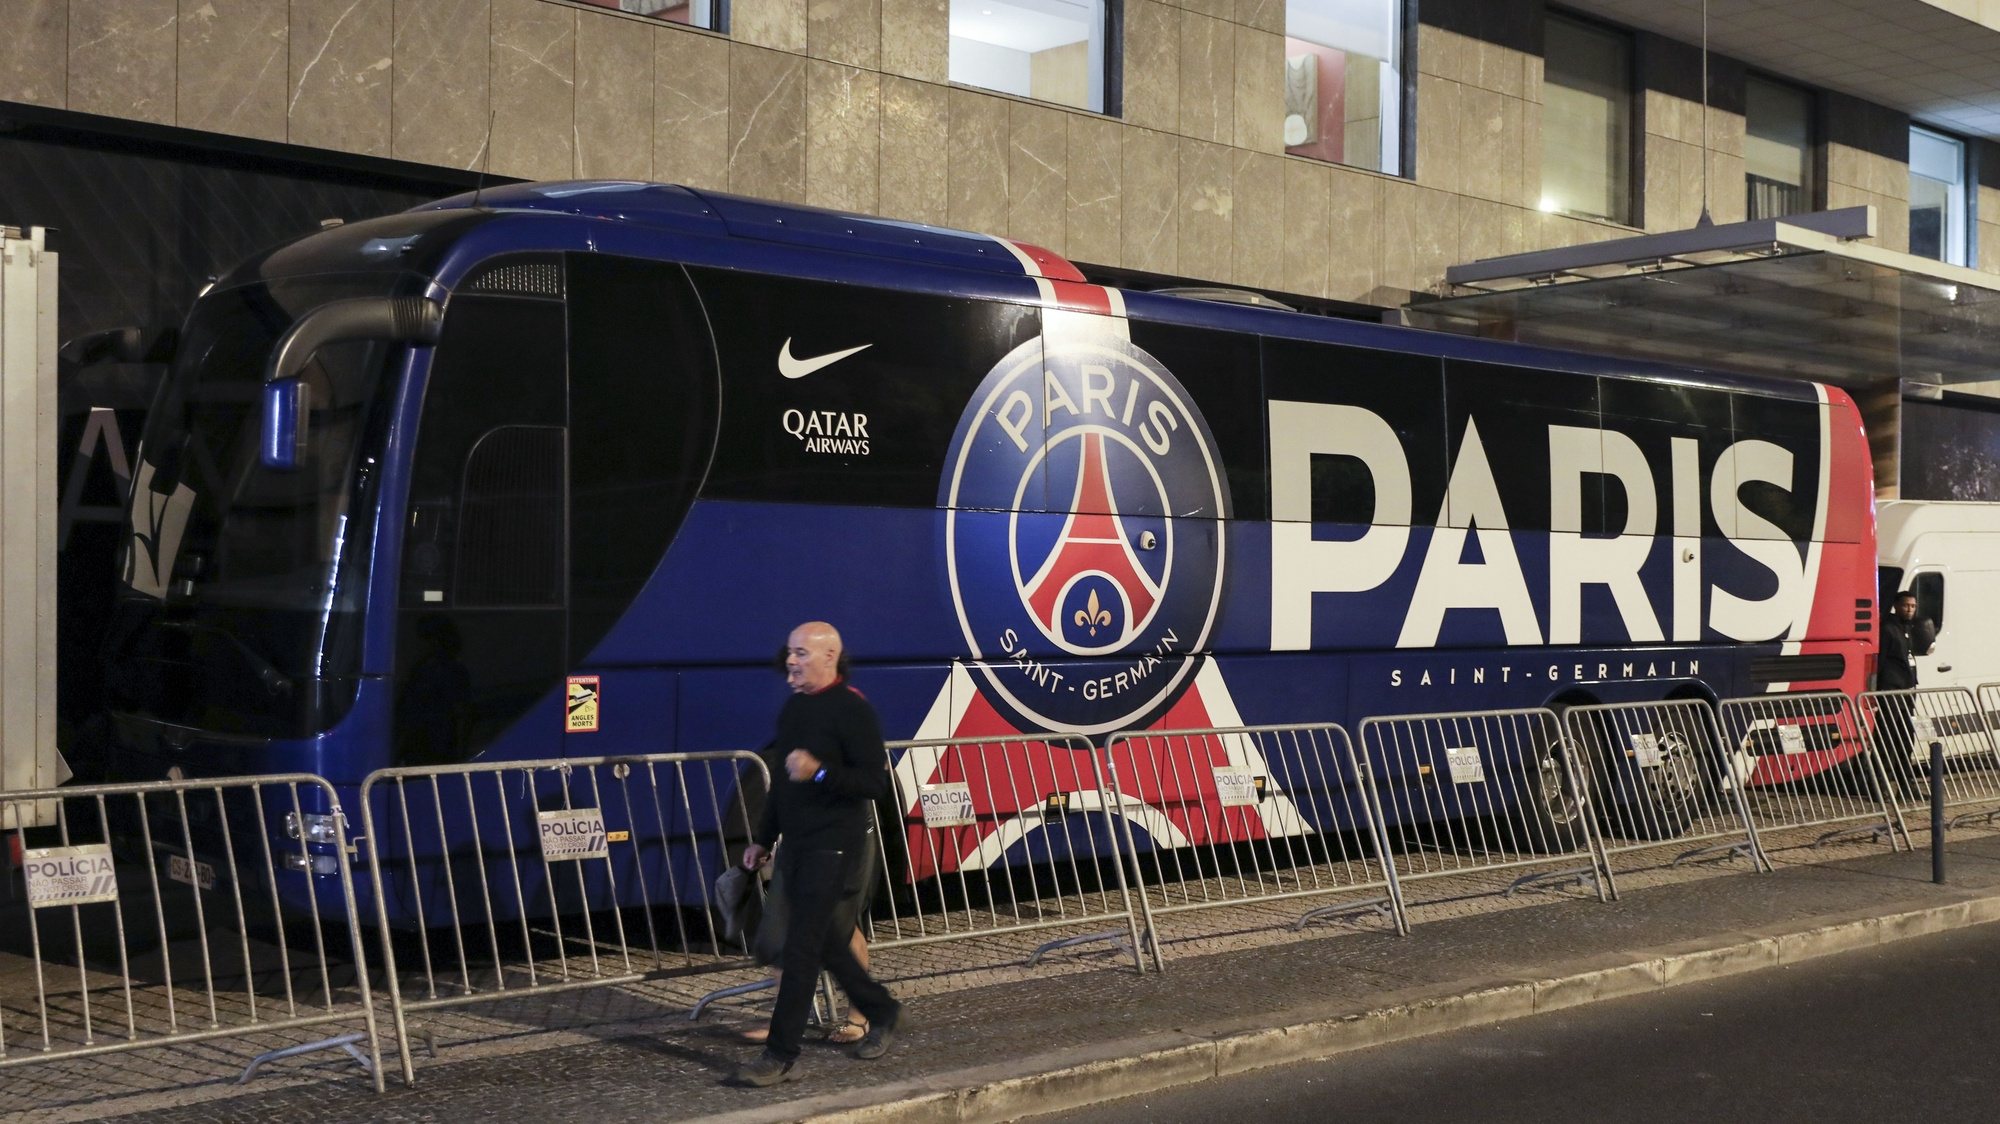 Paris Saint Germain team Bus seen parked outside a hotel in Lisbon where the team is hosted before facing Benfica tomorow in the UEFA Champions League group H match, Lisbon, Portugal, 4 October 2022. MIGUEL A. LOPES/LUSA